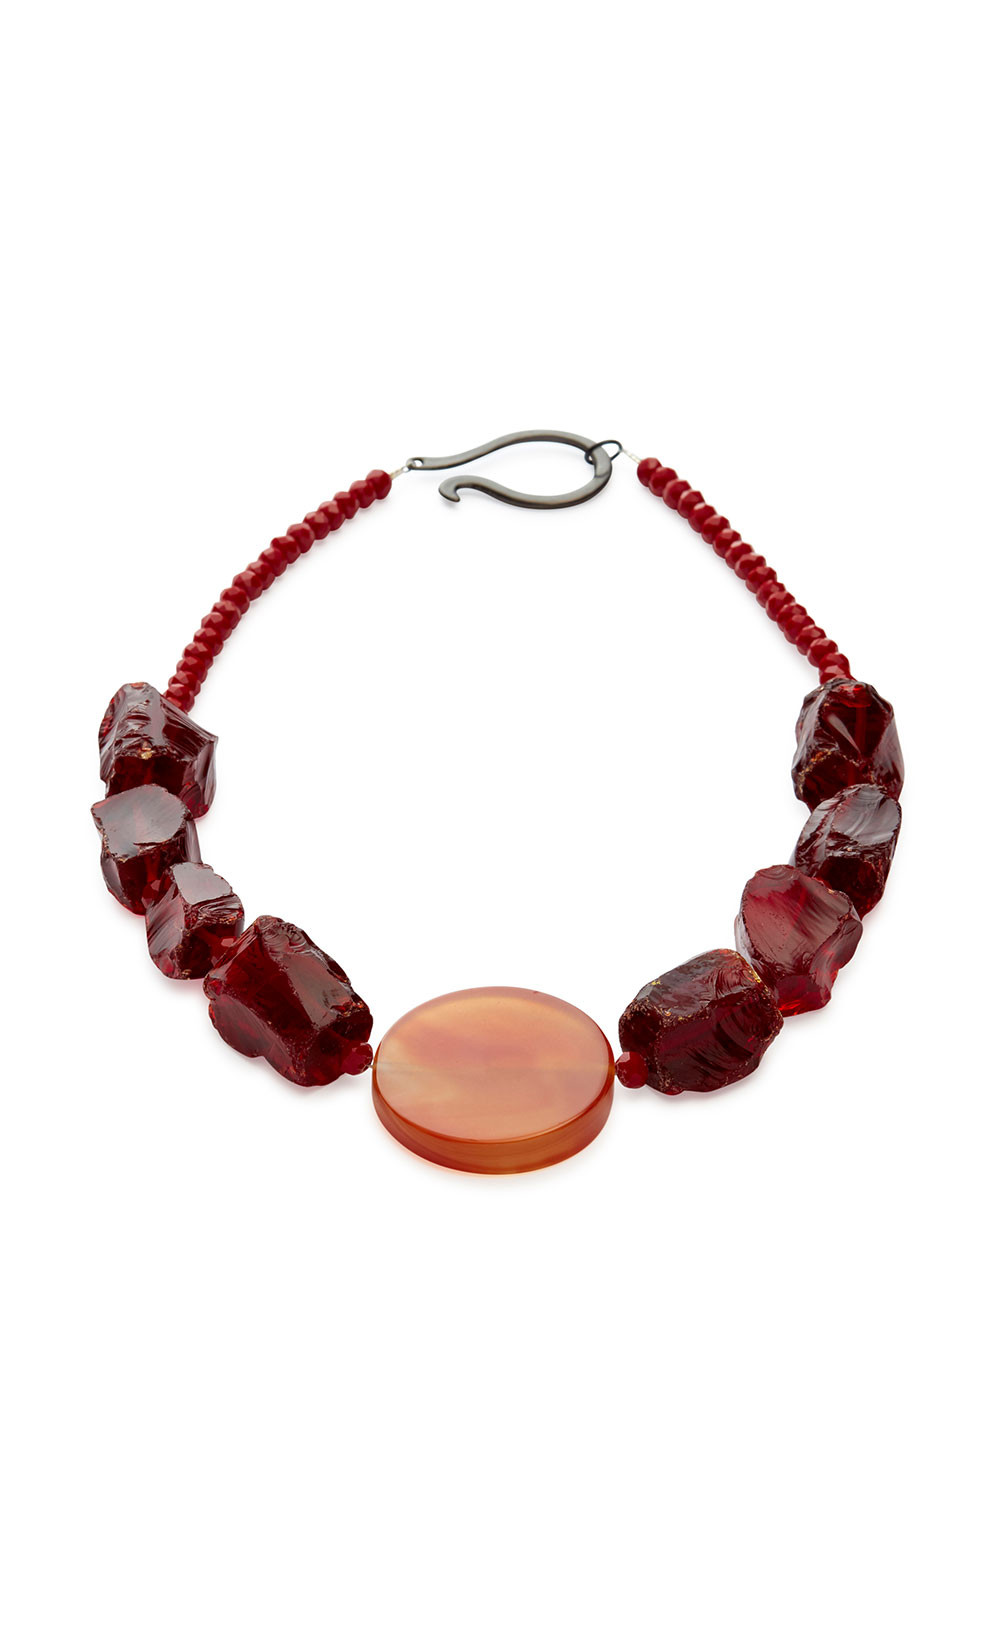 Rubies Necklace